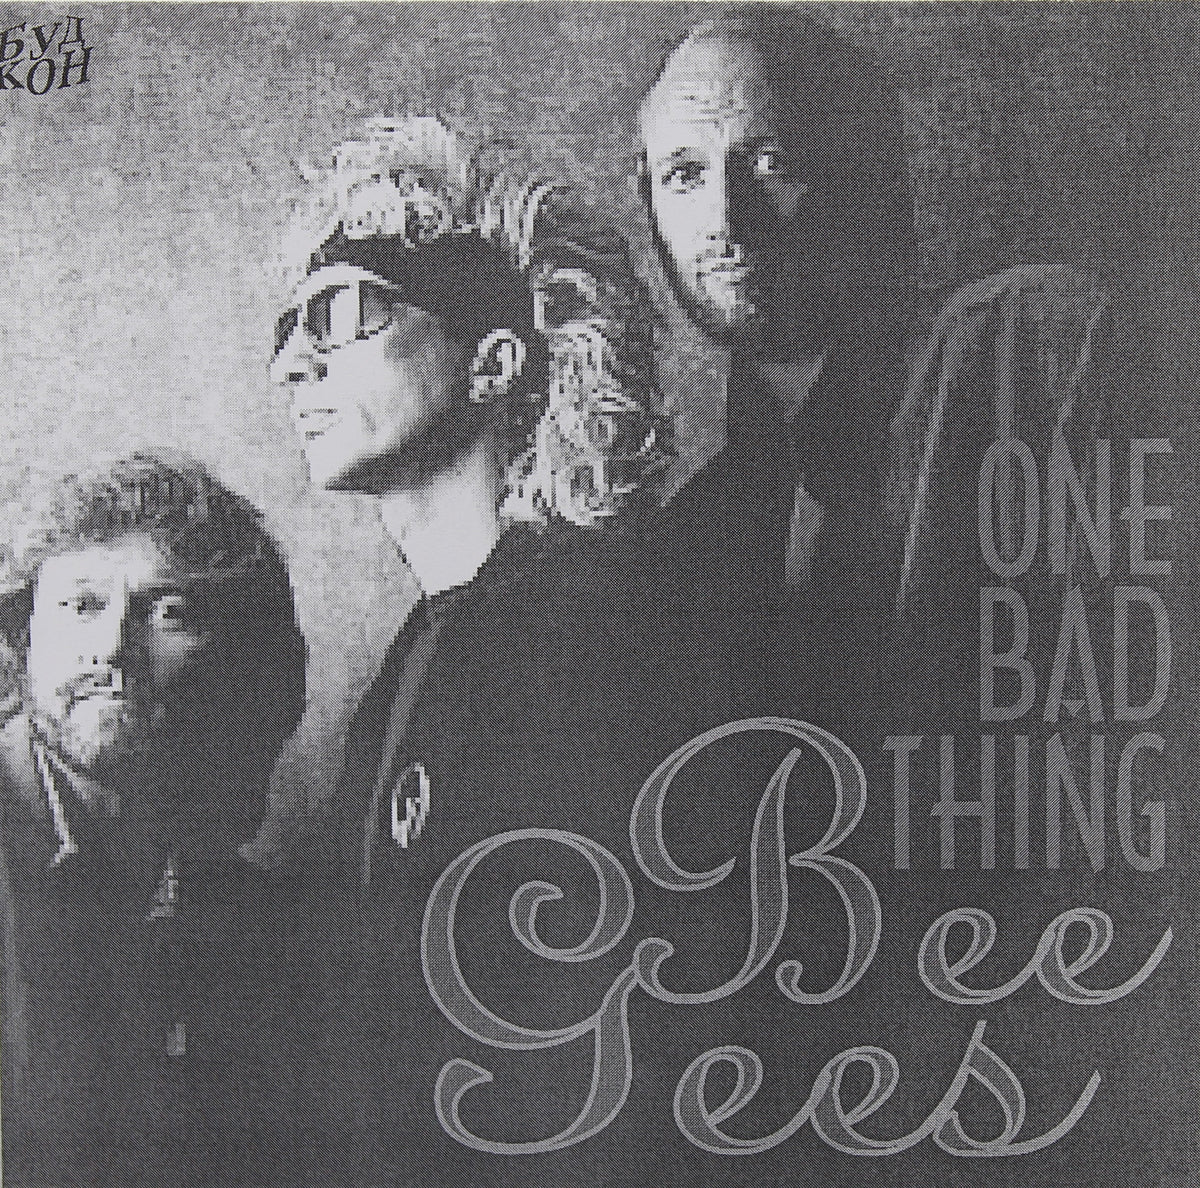 Bee Gees - One Bad Thing, Flexi-disc, 5½&quot;, 45 RPM, Single Sided, Unofficial Release, Russia